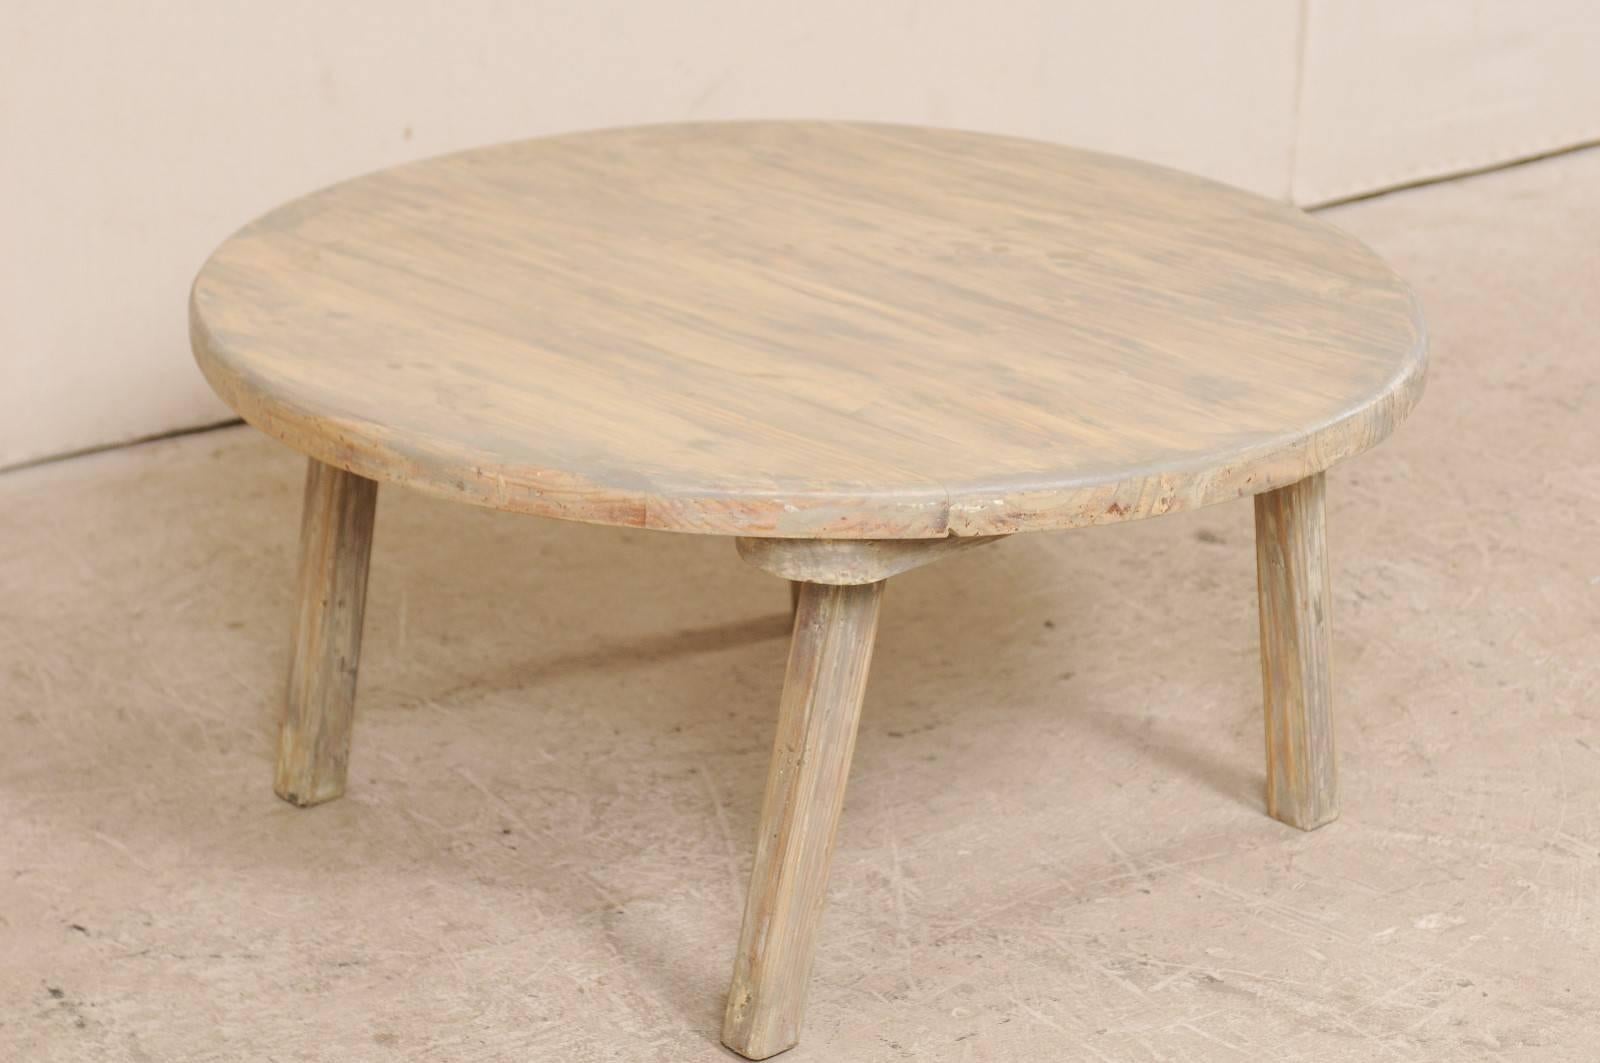 A vintage American painted wood coffee table. This American coffee table features a round-shaped top which is raised by four squared legs. This rustic little table has a wash of grey and cream, with much of the wood grain showing through. This